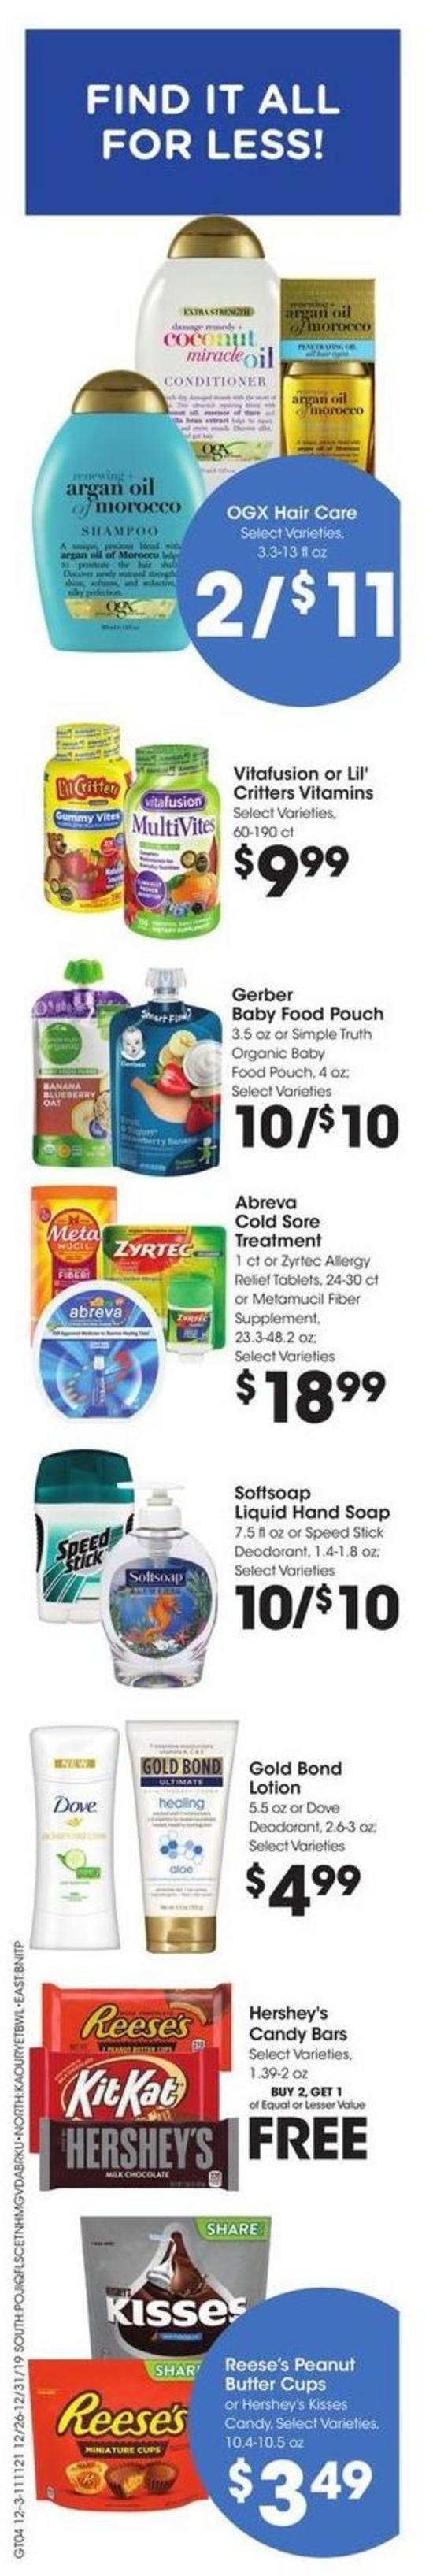 Fred Meyer Weekly Ad from December 26